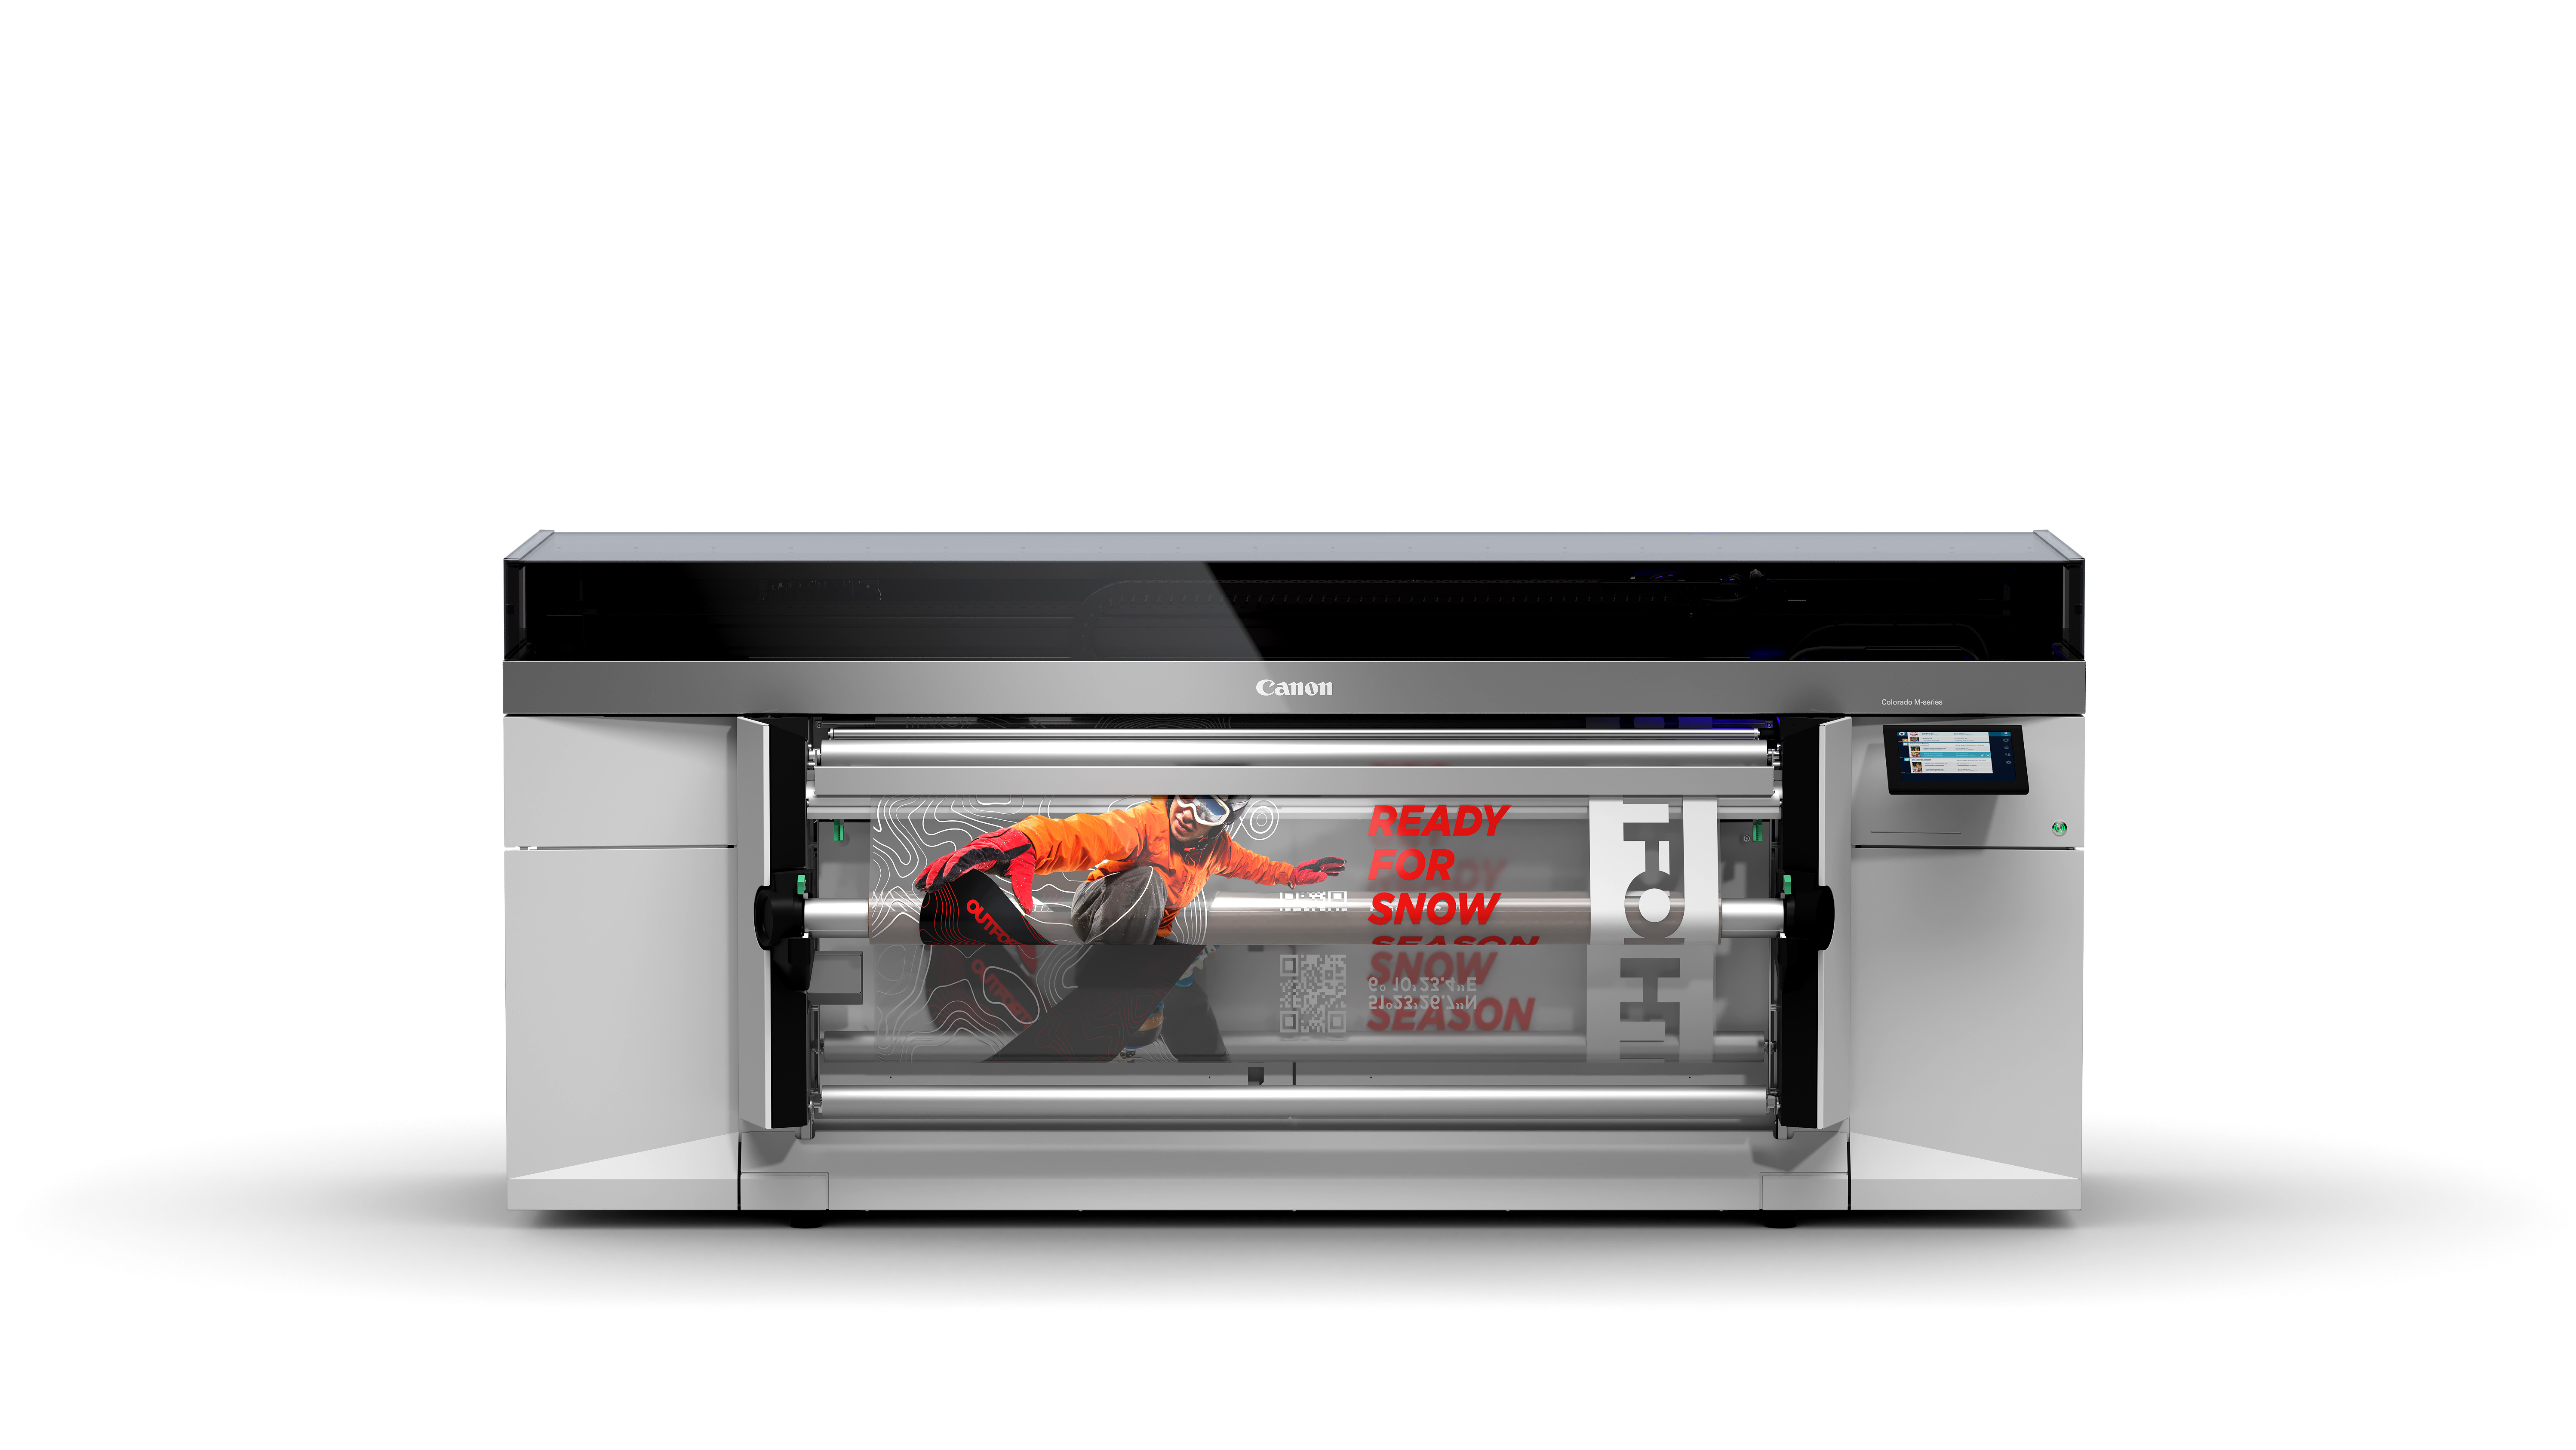 The Colorado M-series 64-inch roll-to-roll printer featuring two speed configurations and optional UVgel white ink capabilities 